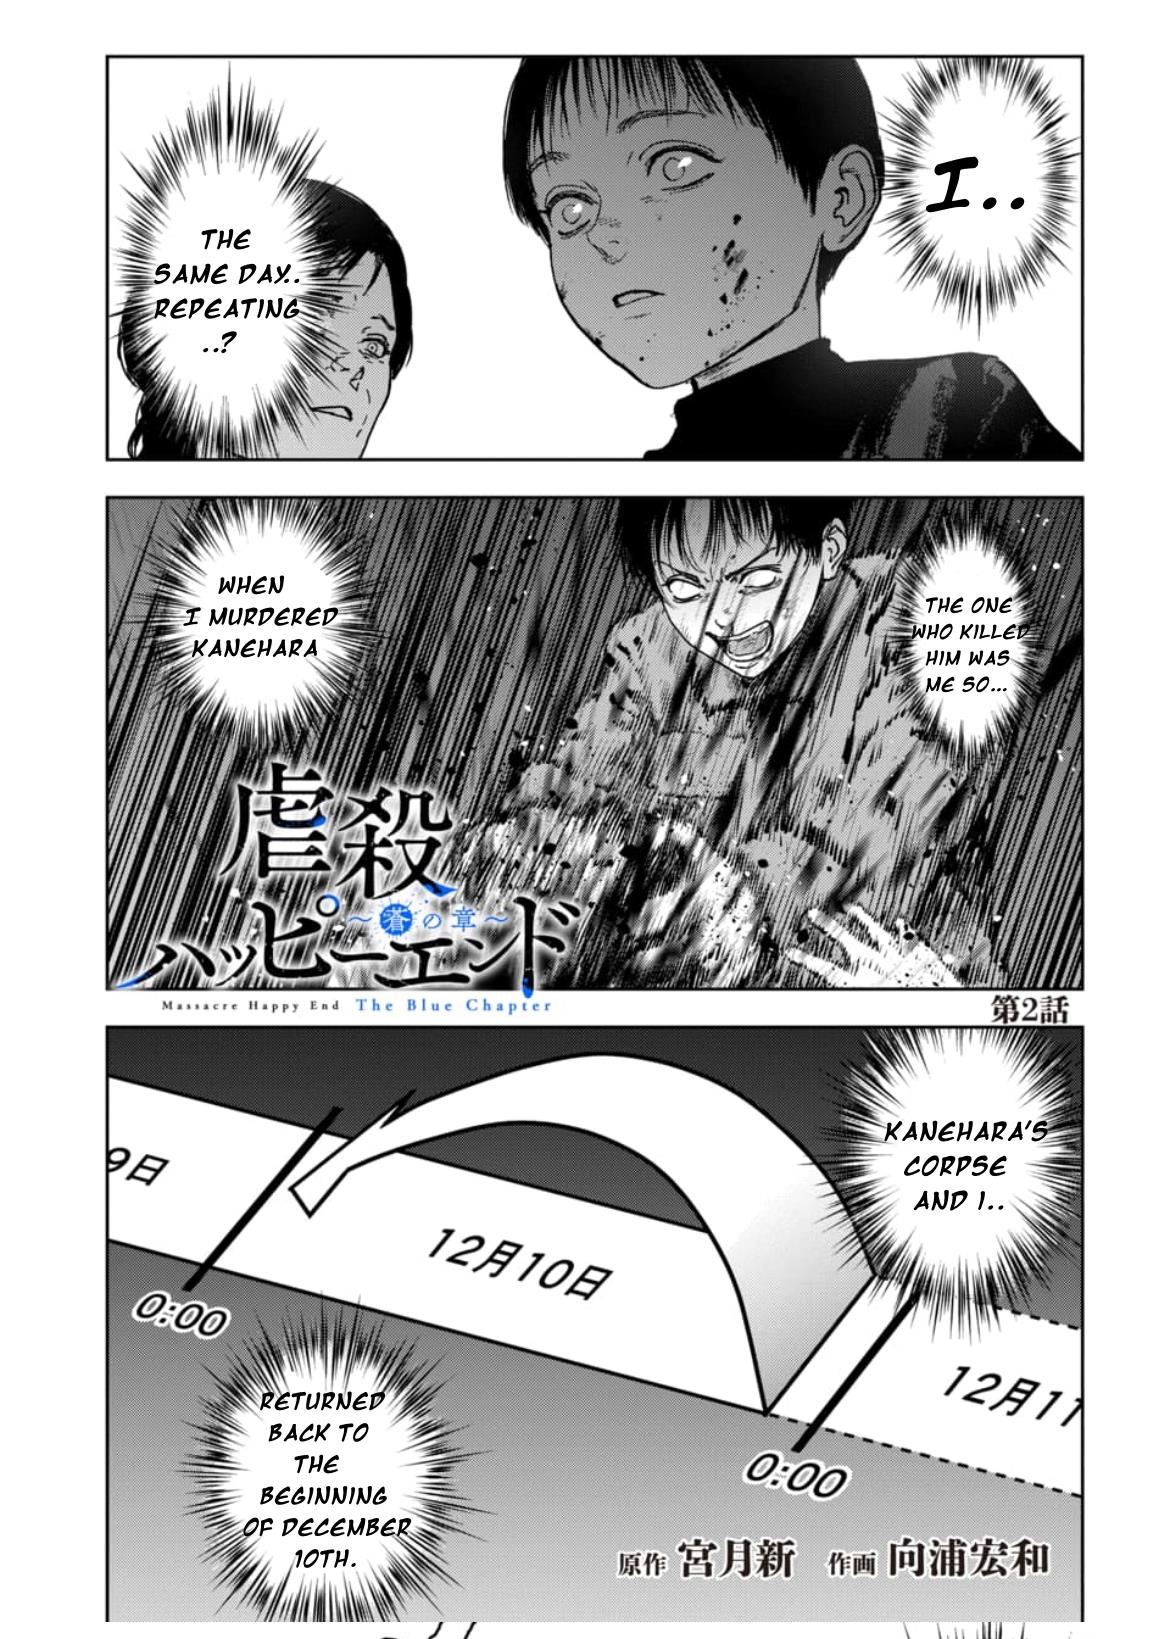 Massacre Happy Ending - Chapter Of Blue - Vol.1 Chapter 4: Chapter 4 - Picture 2